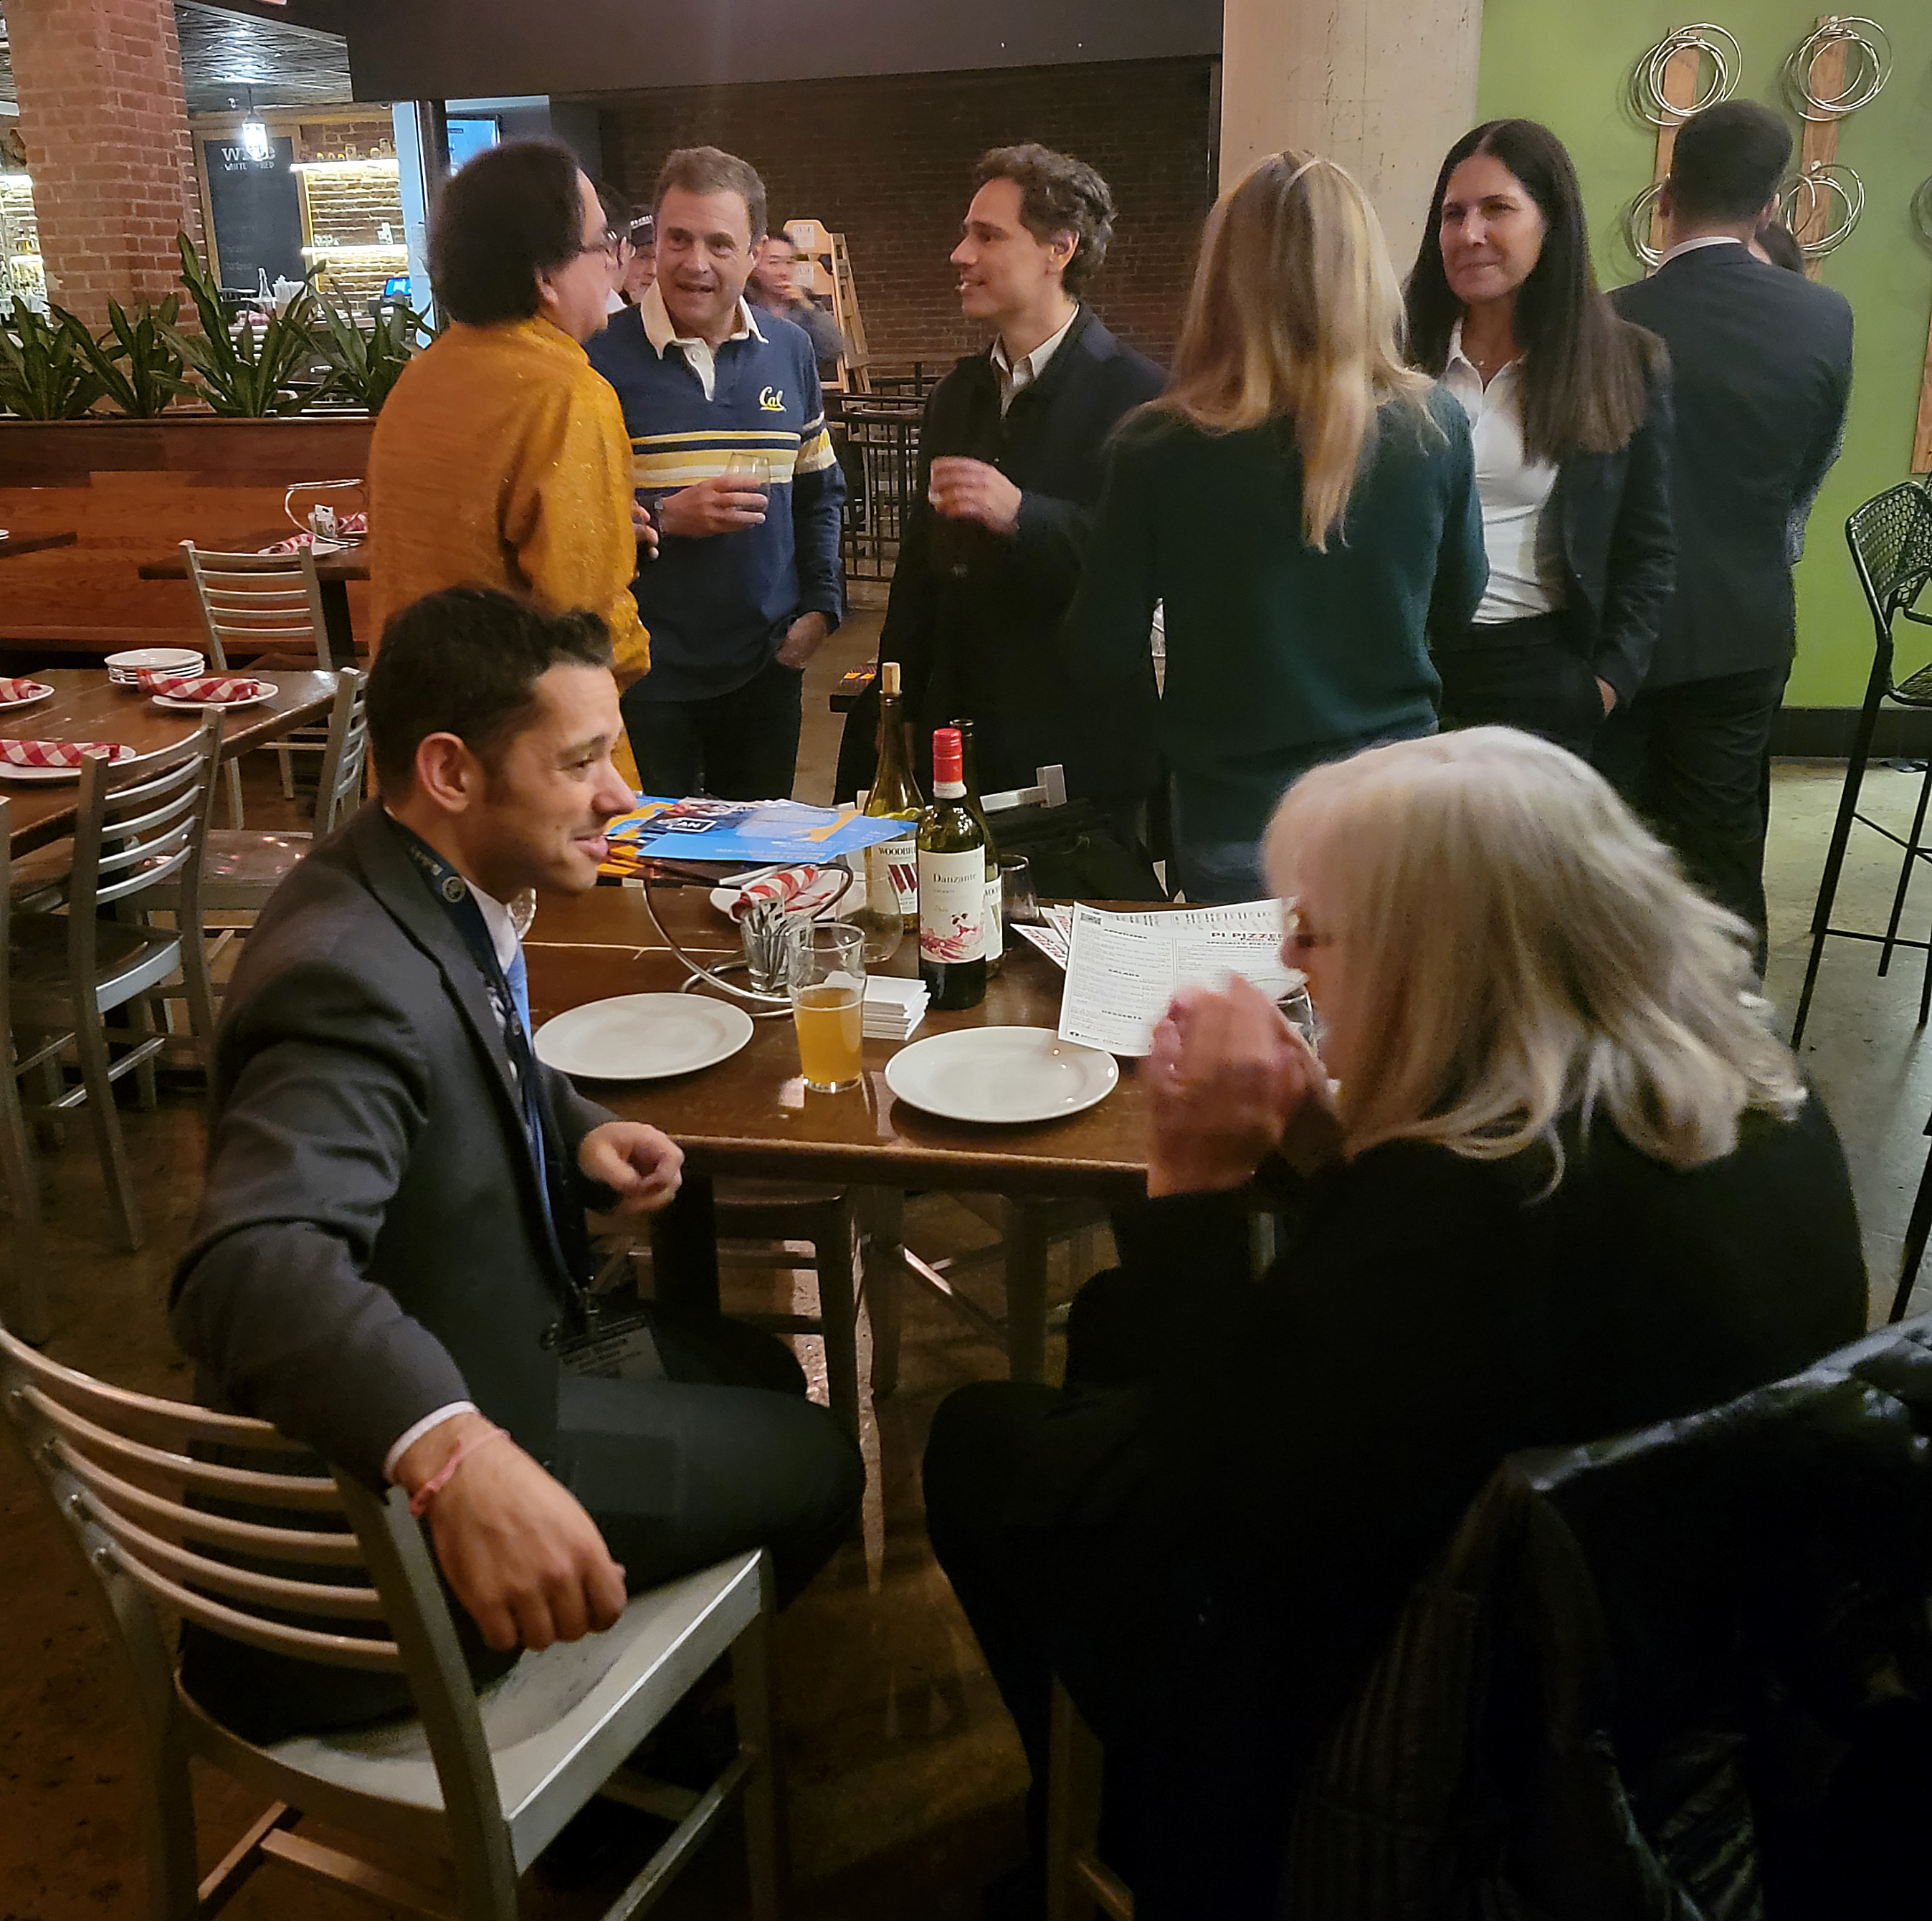 We had the opportunity to meet with members of the Washington DC UC Berkeley alumni group and made some new friends!